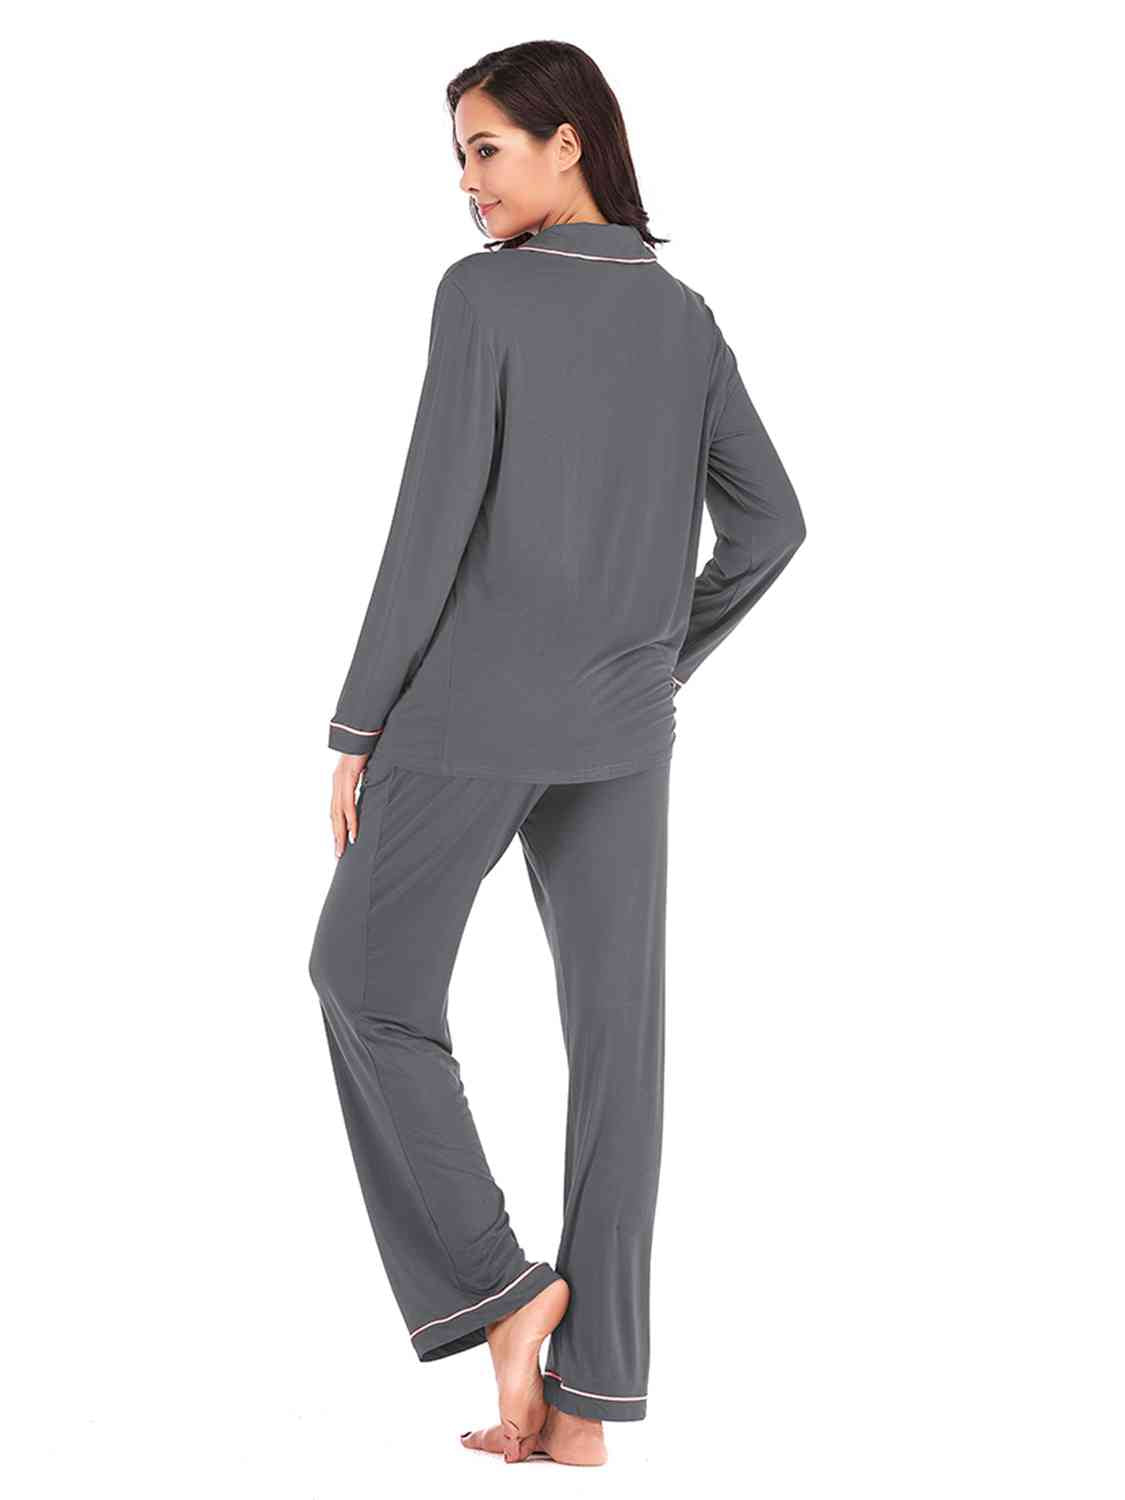 Collared Neck Long Sleeve Loungewear Set with Pockets (9 Colors) Loungewear Krazy Heart Designs Boutique   